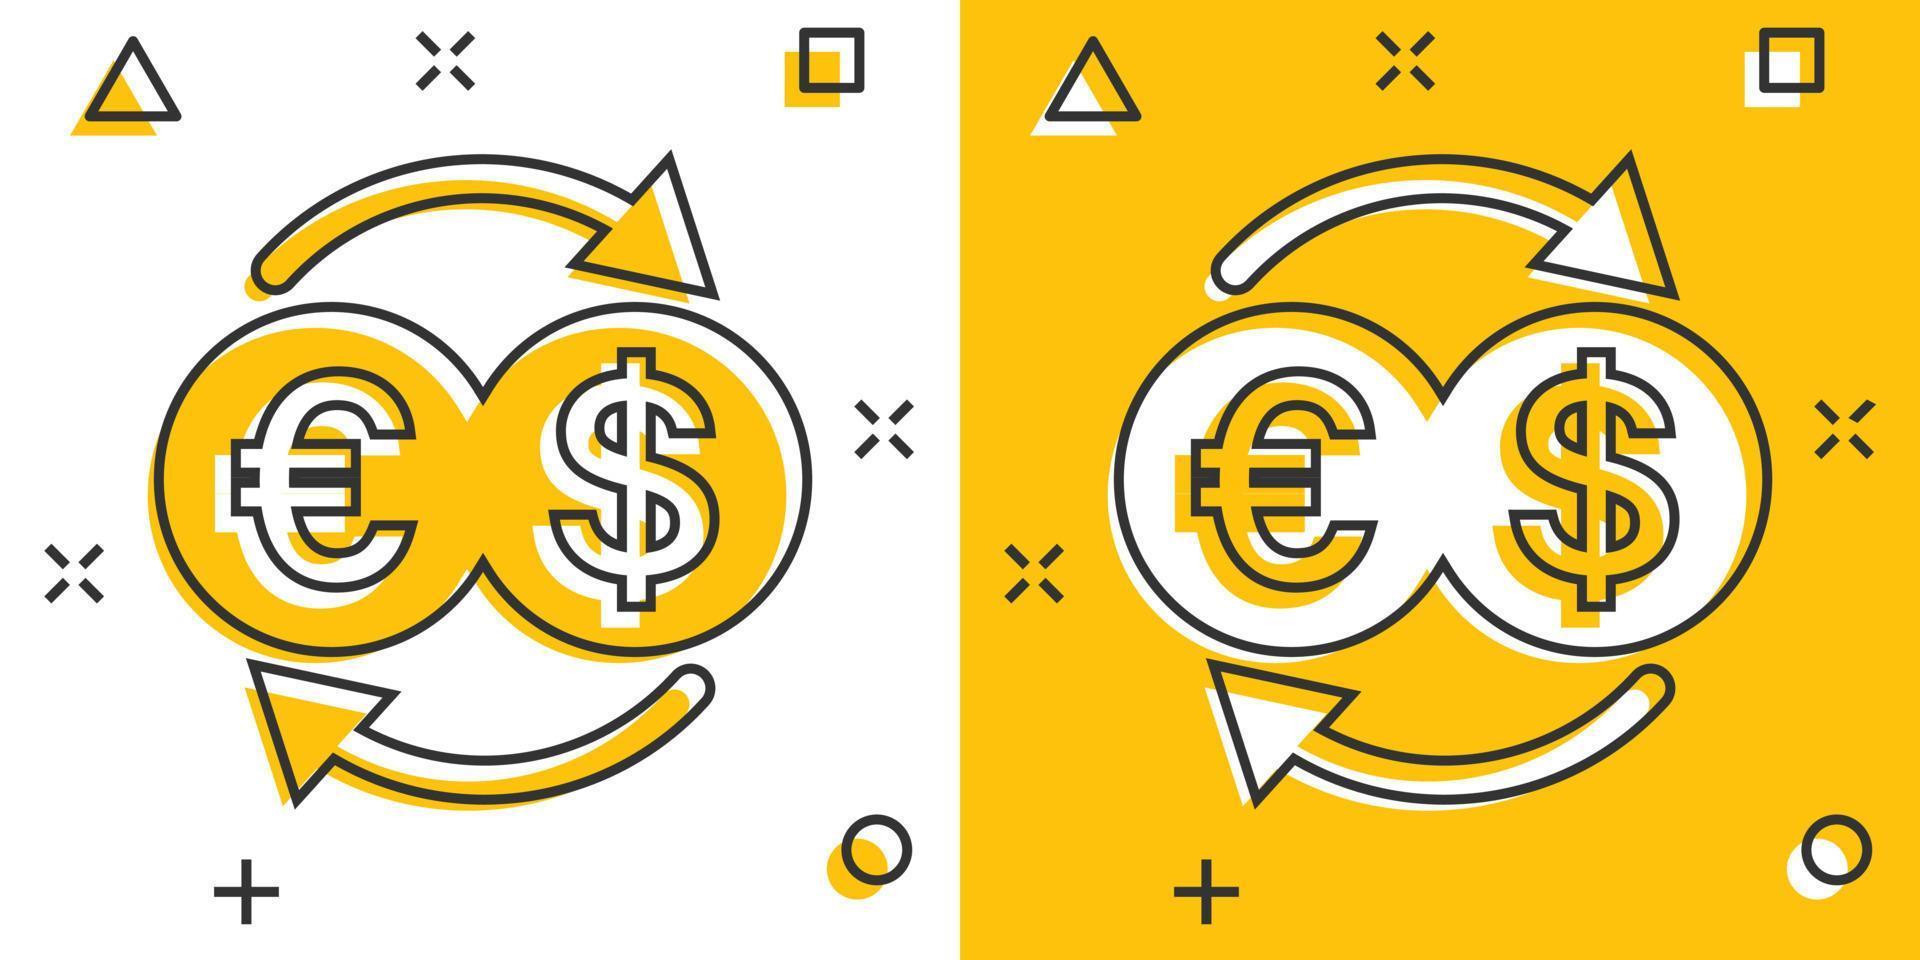 Currency exchange icon in comic style. Dollar euro transfer cartoon vector illustration on white isolated background. Financial process splash effect business concept.